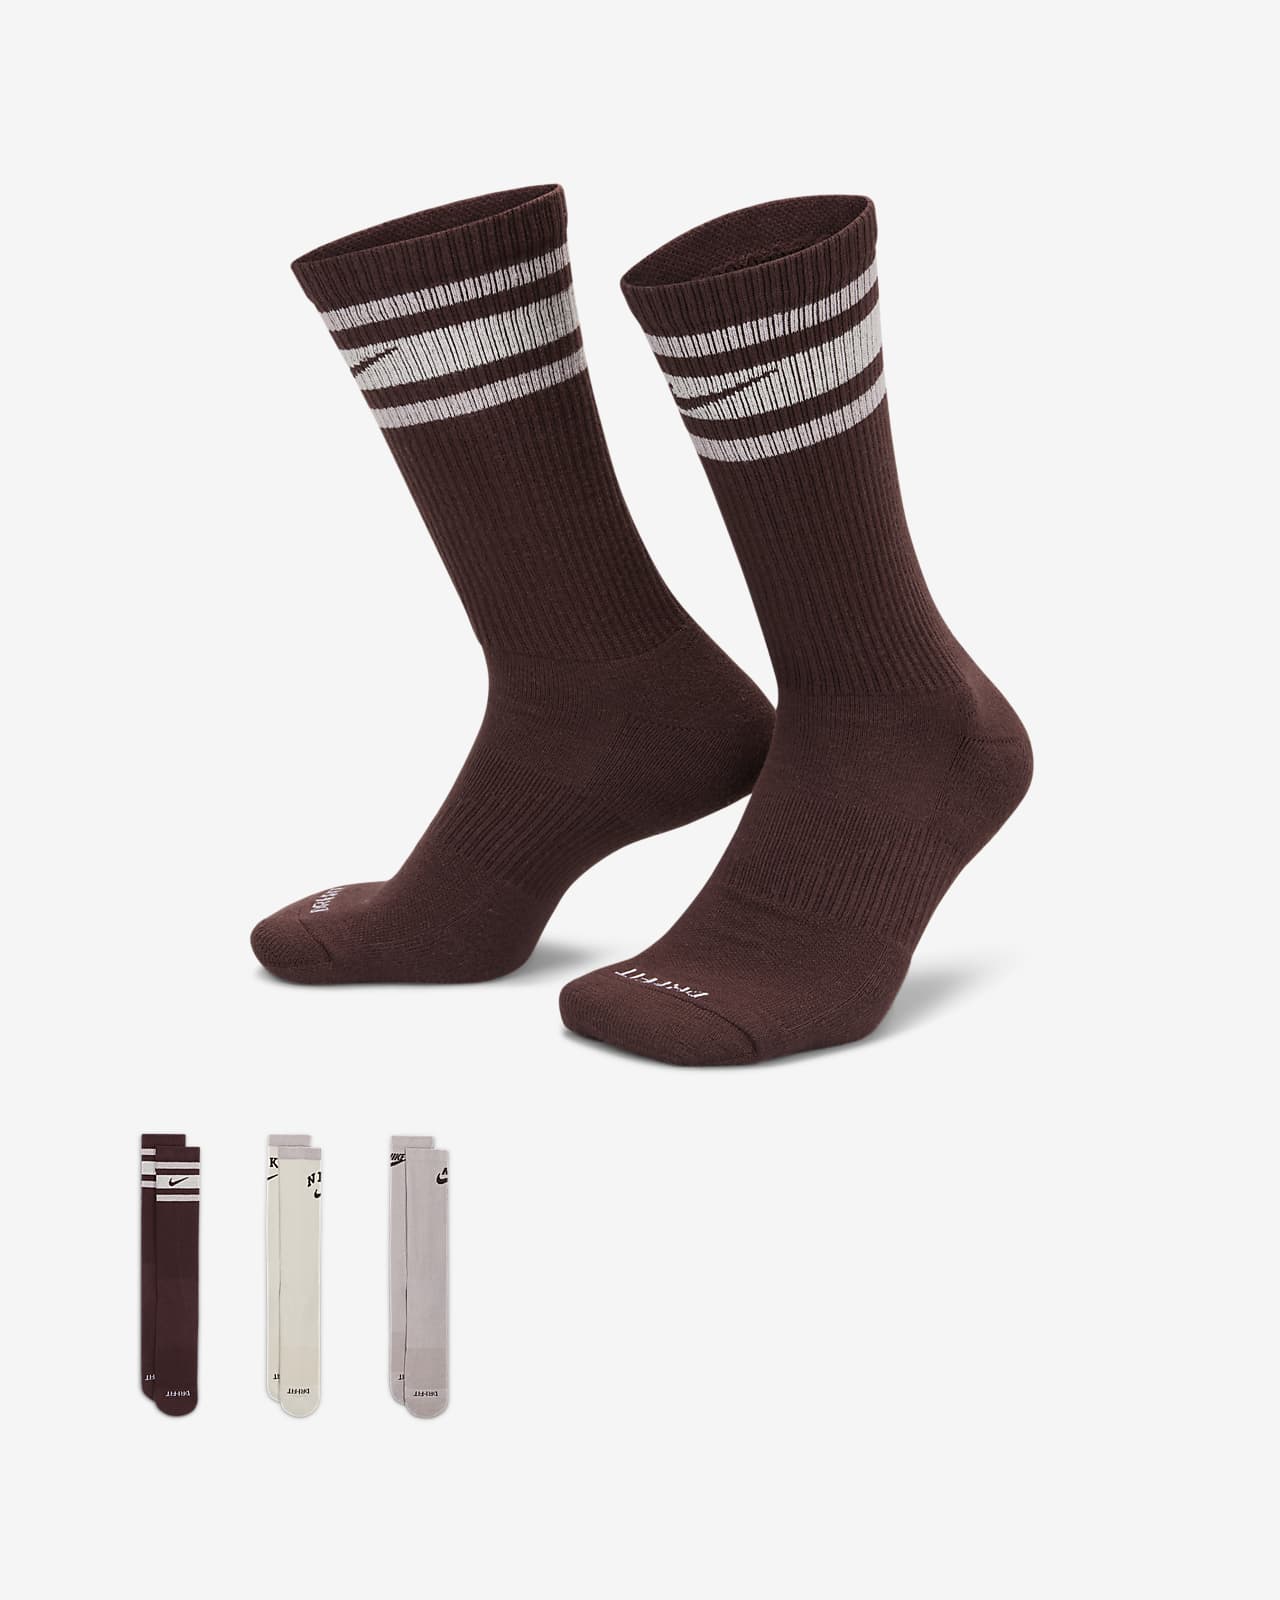 Chaussettes mi-mollet Nike Everyday Plus Cushioned (3 paires)